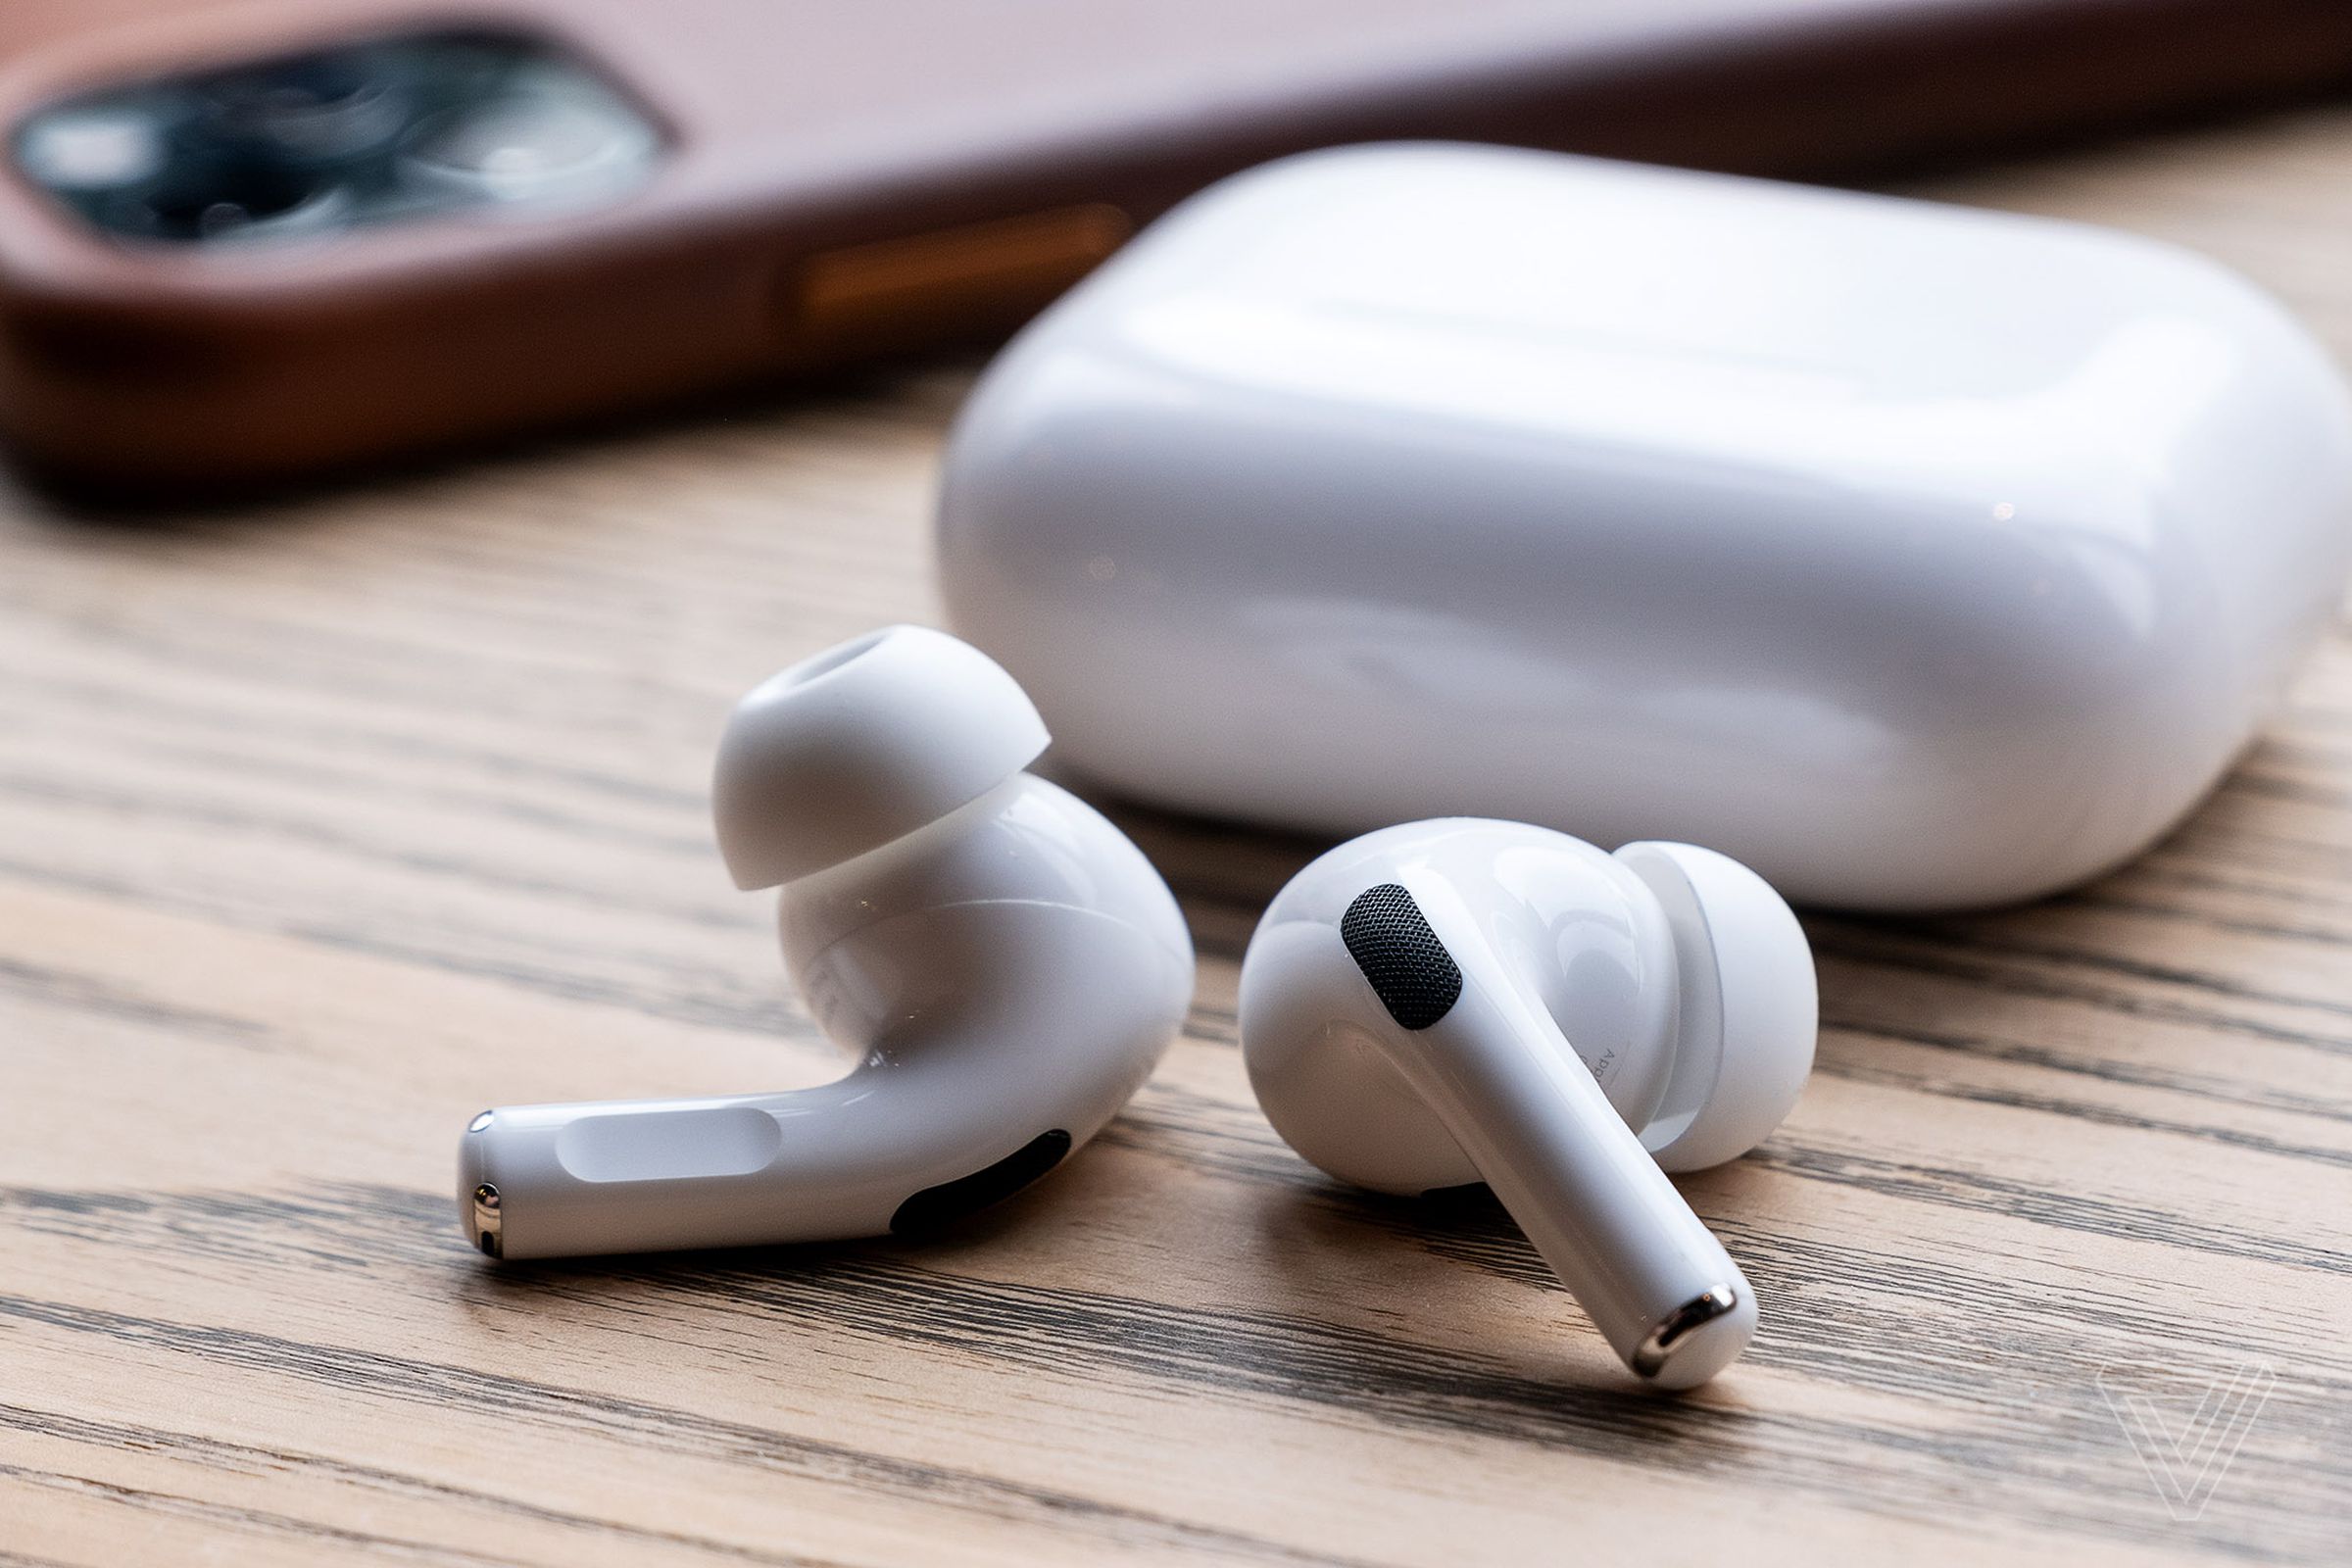 The AirPods Pro, first released in 2019.